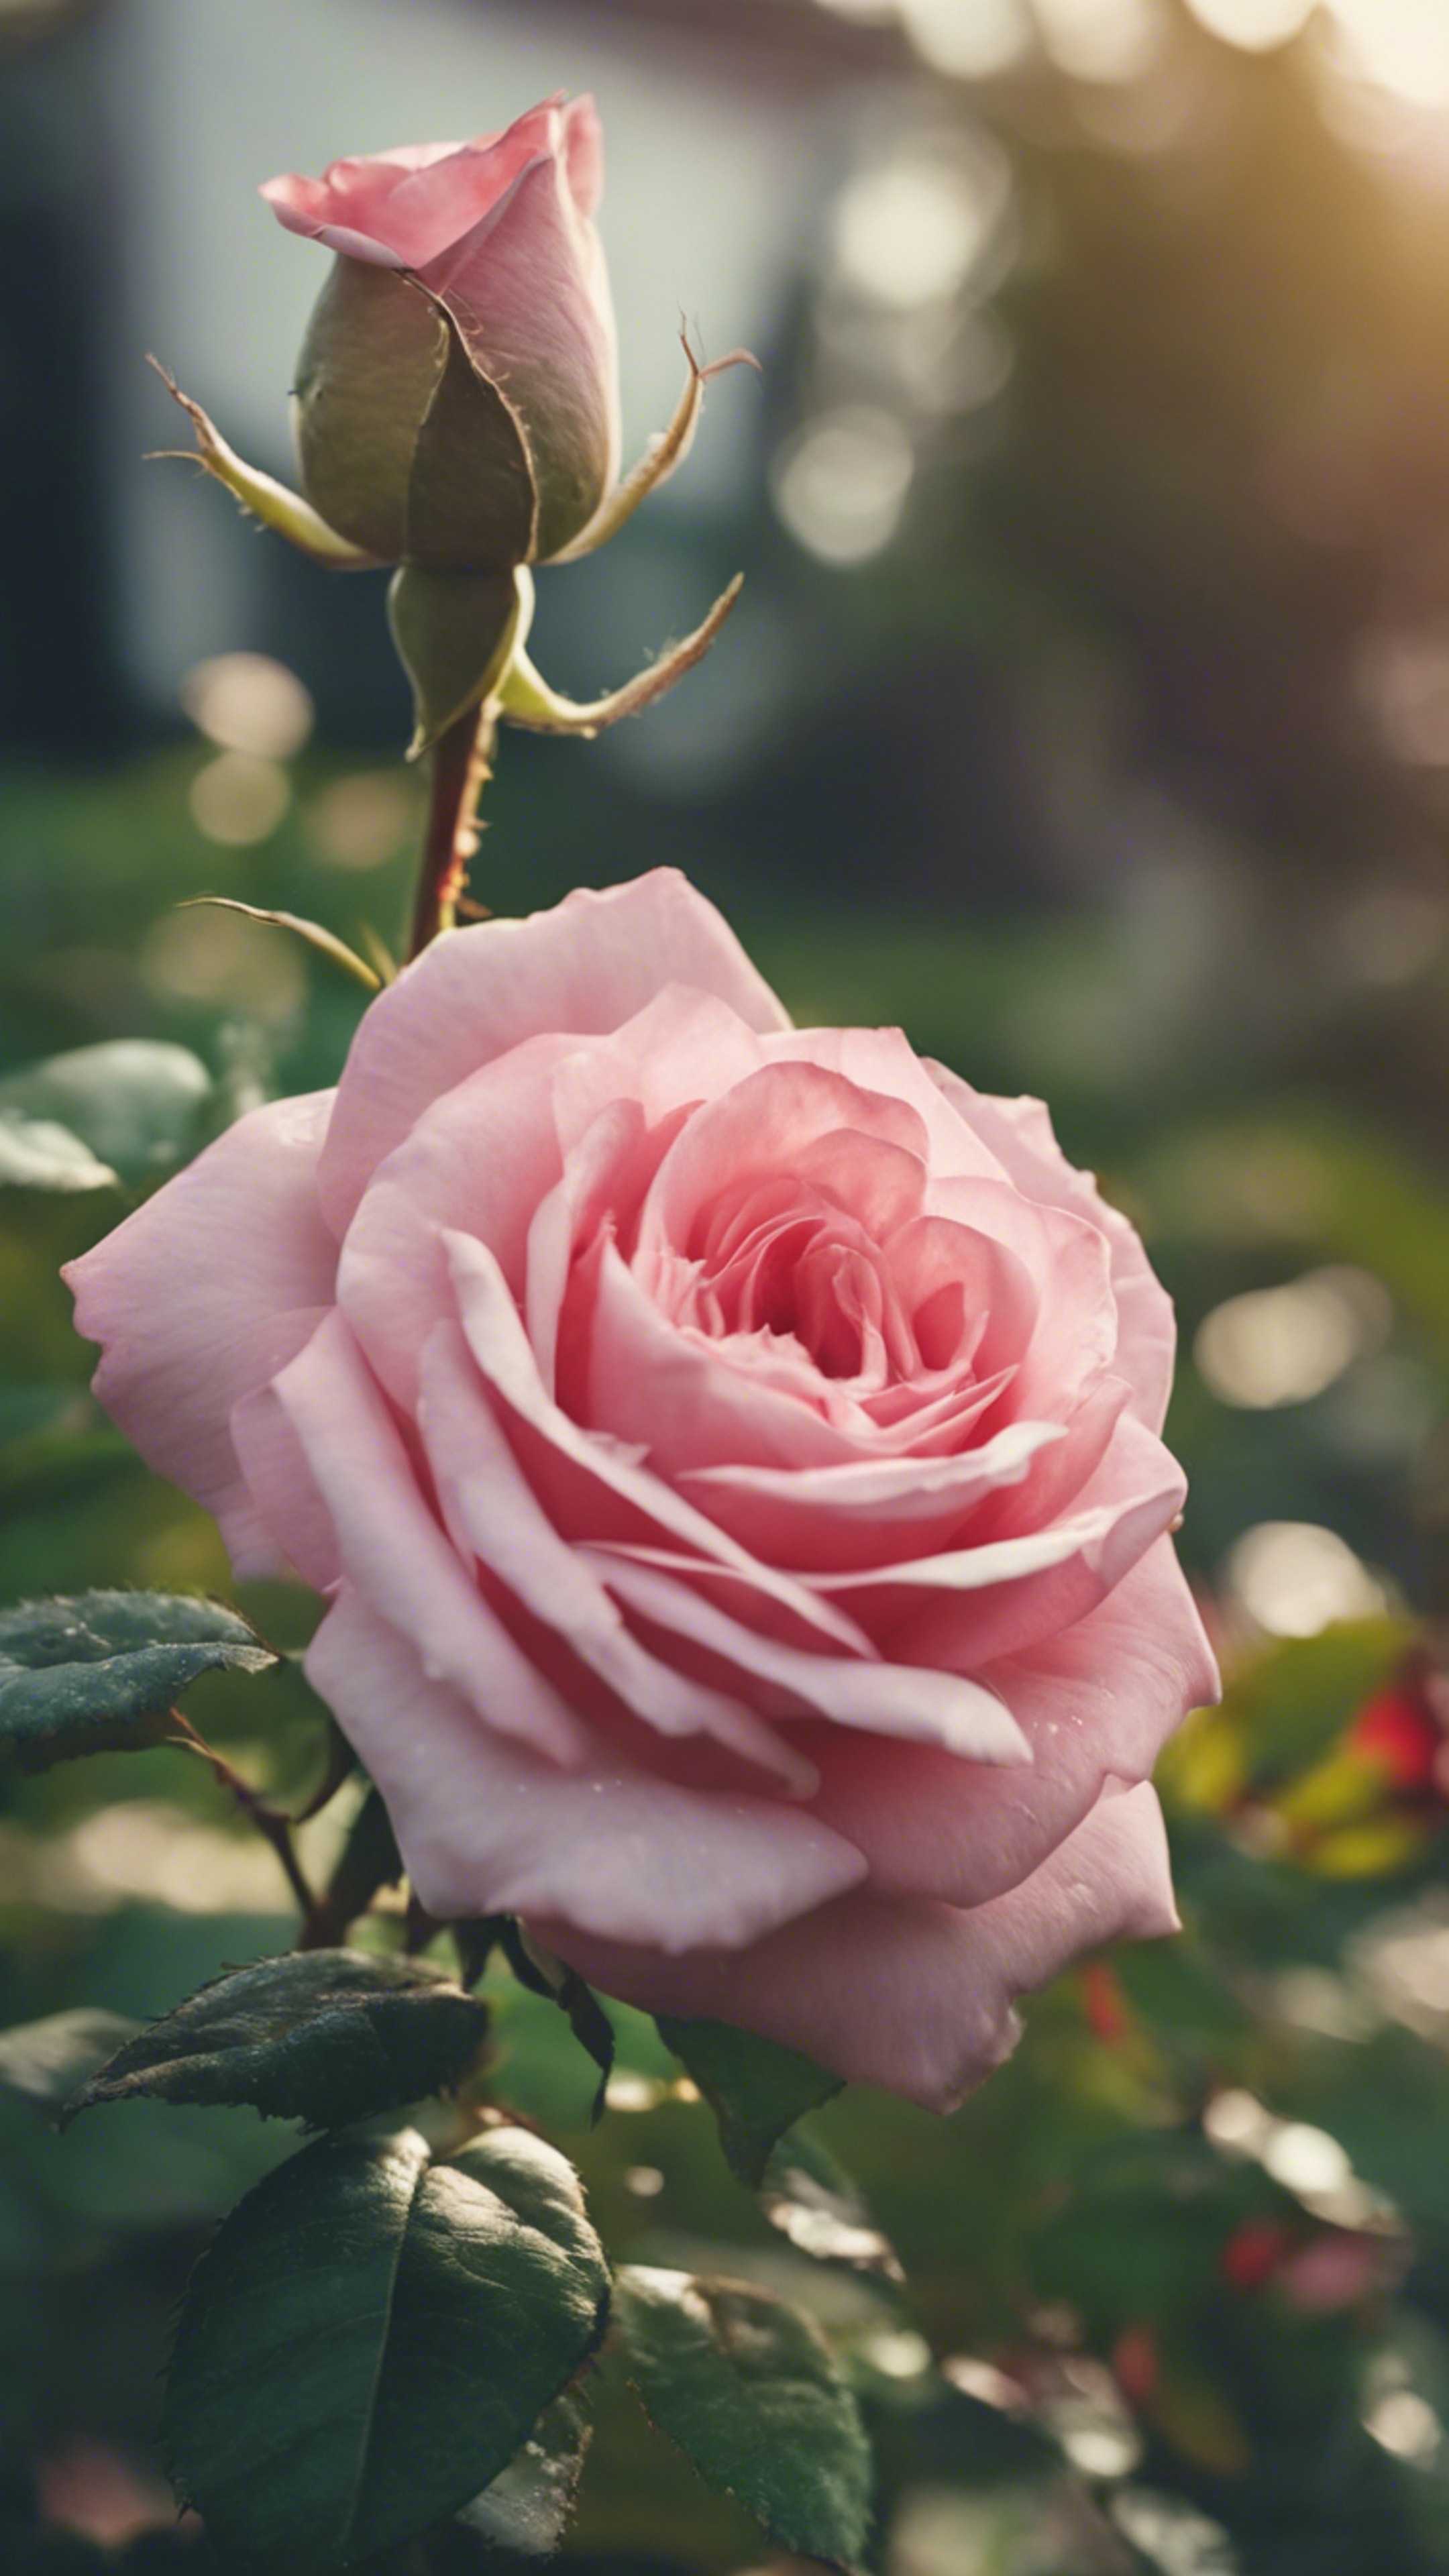 A beautiful pink heart-shaped rose blooming in a lush green garden. Tapet[602cae484ee541a8ab0b]